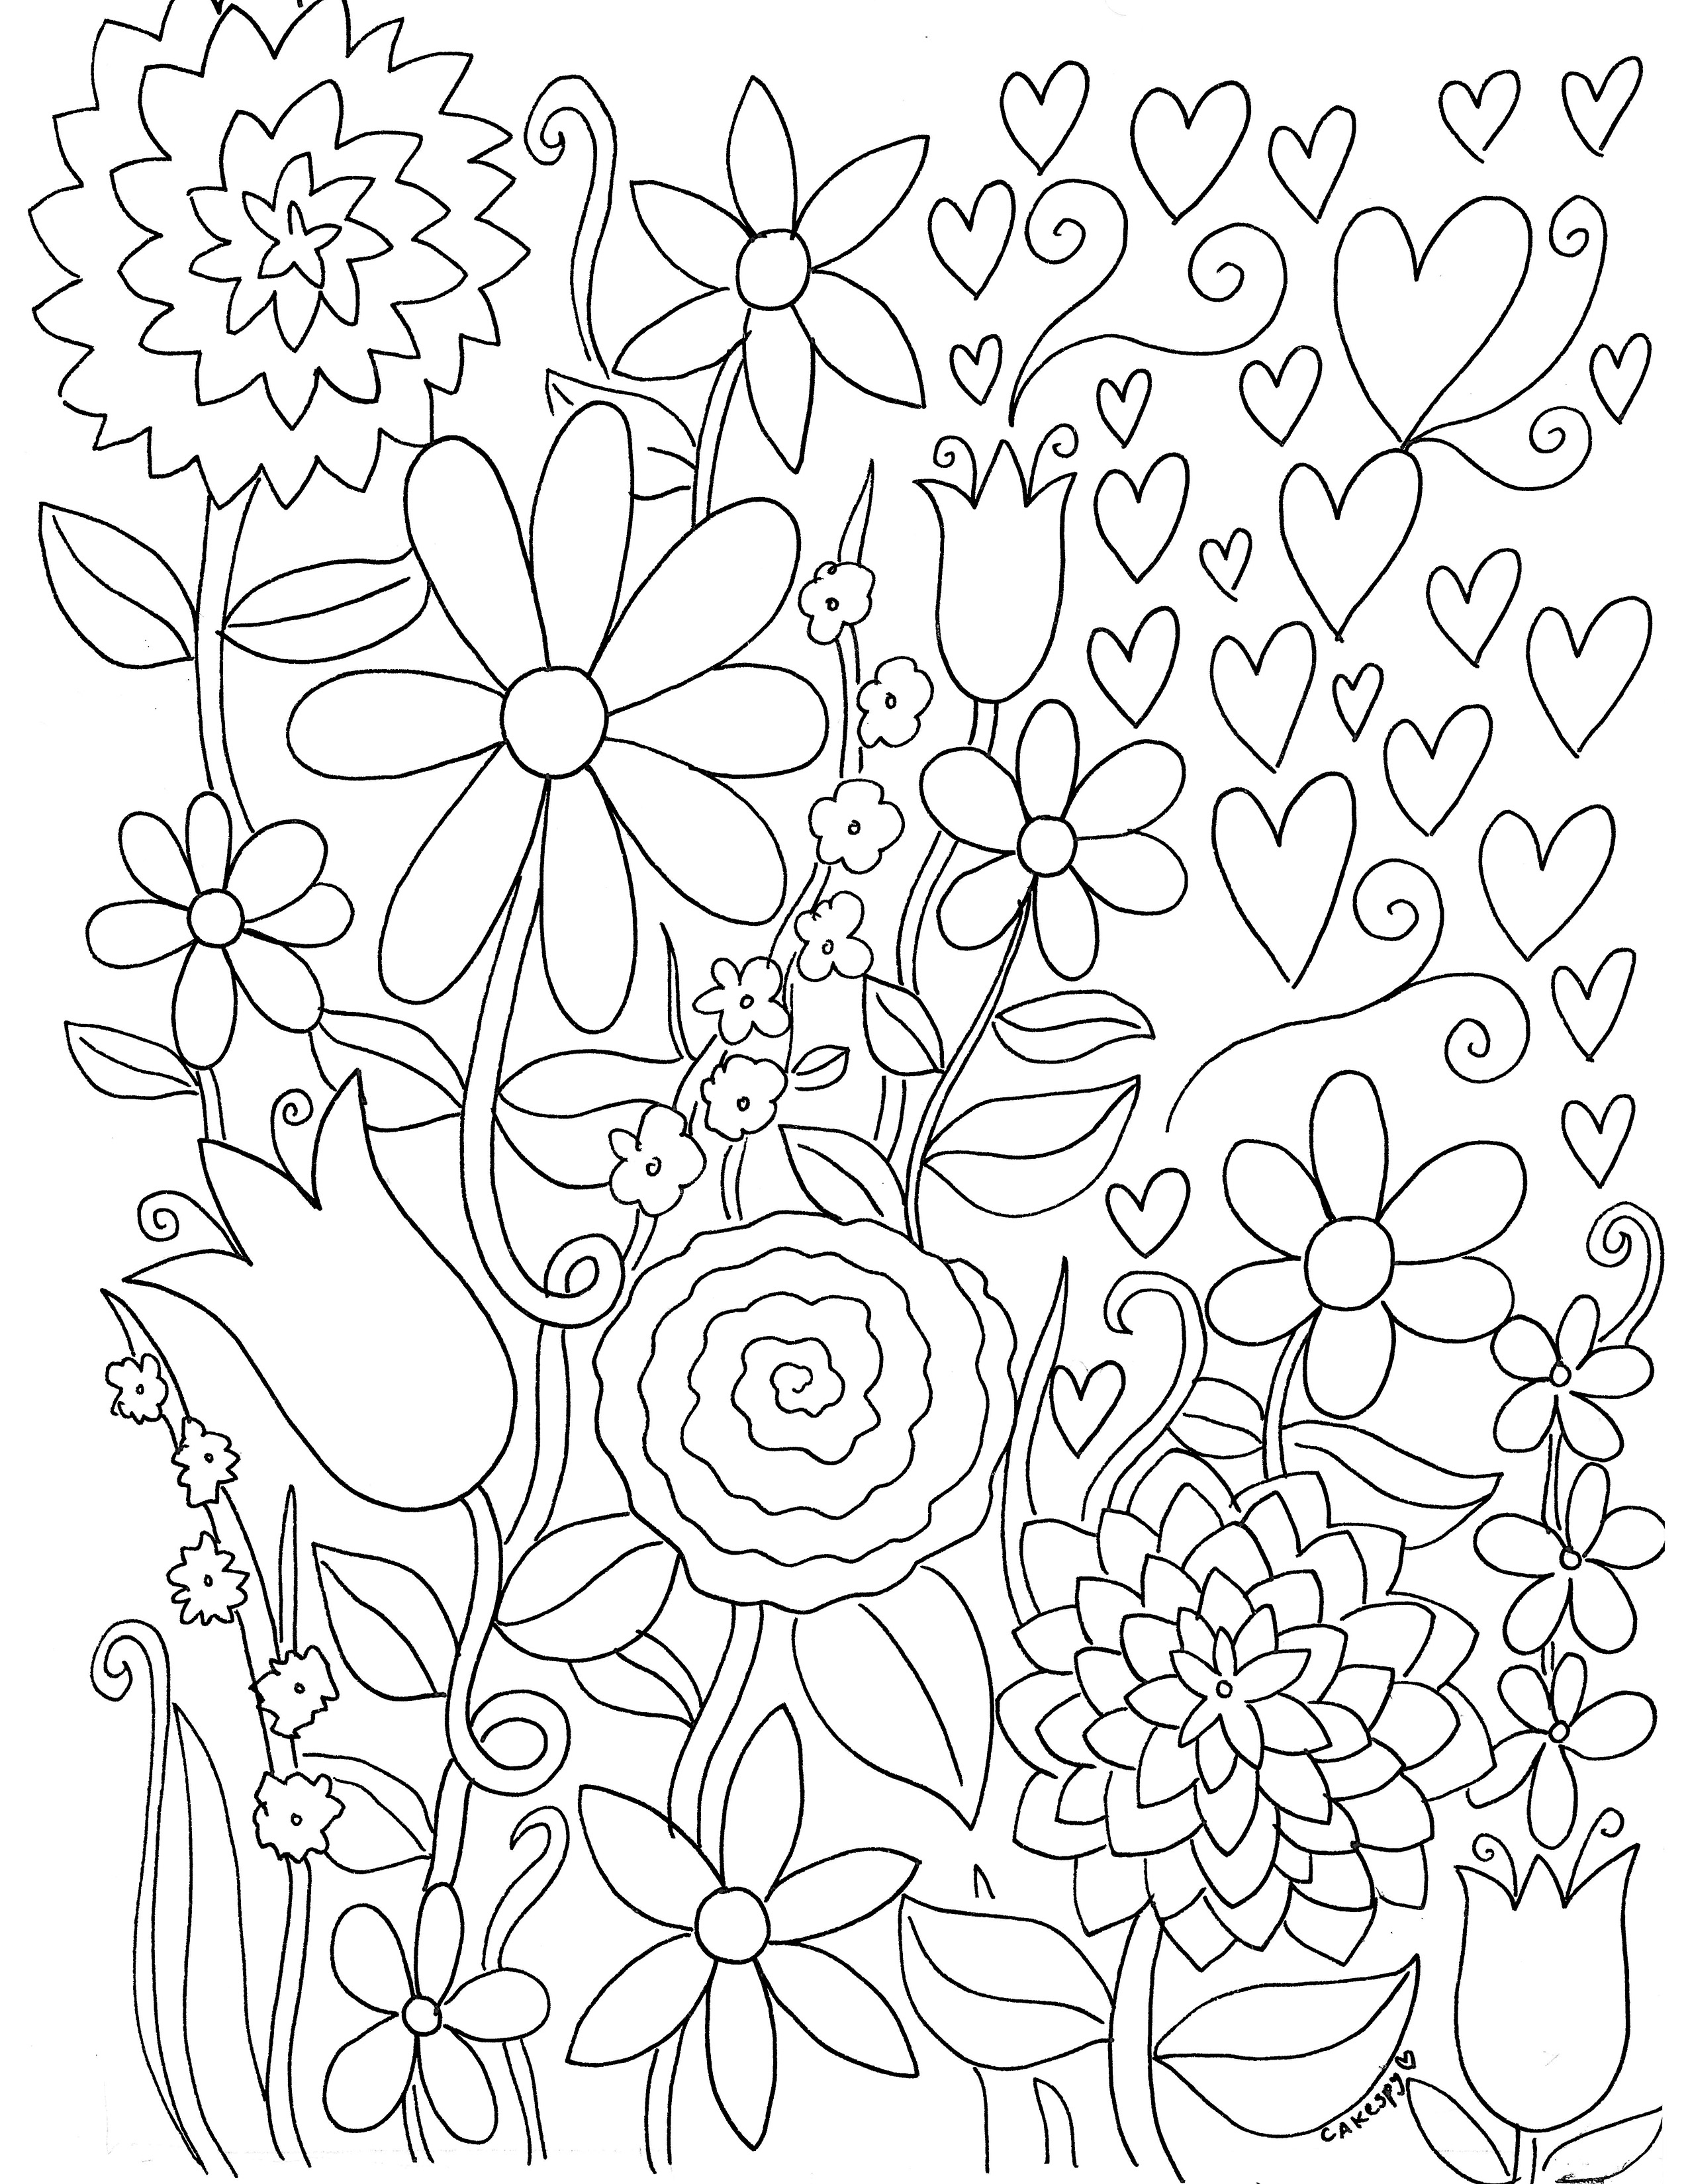 Coloring book pages fanciful florals